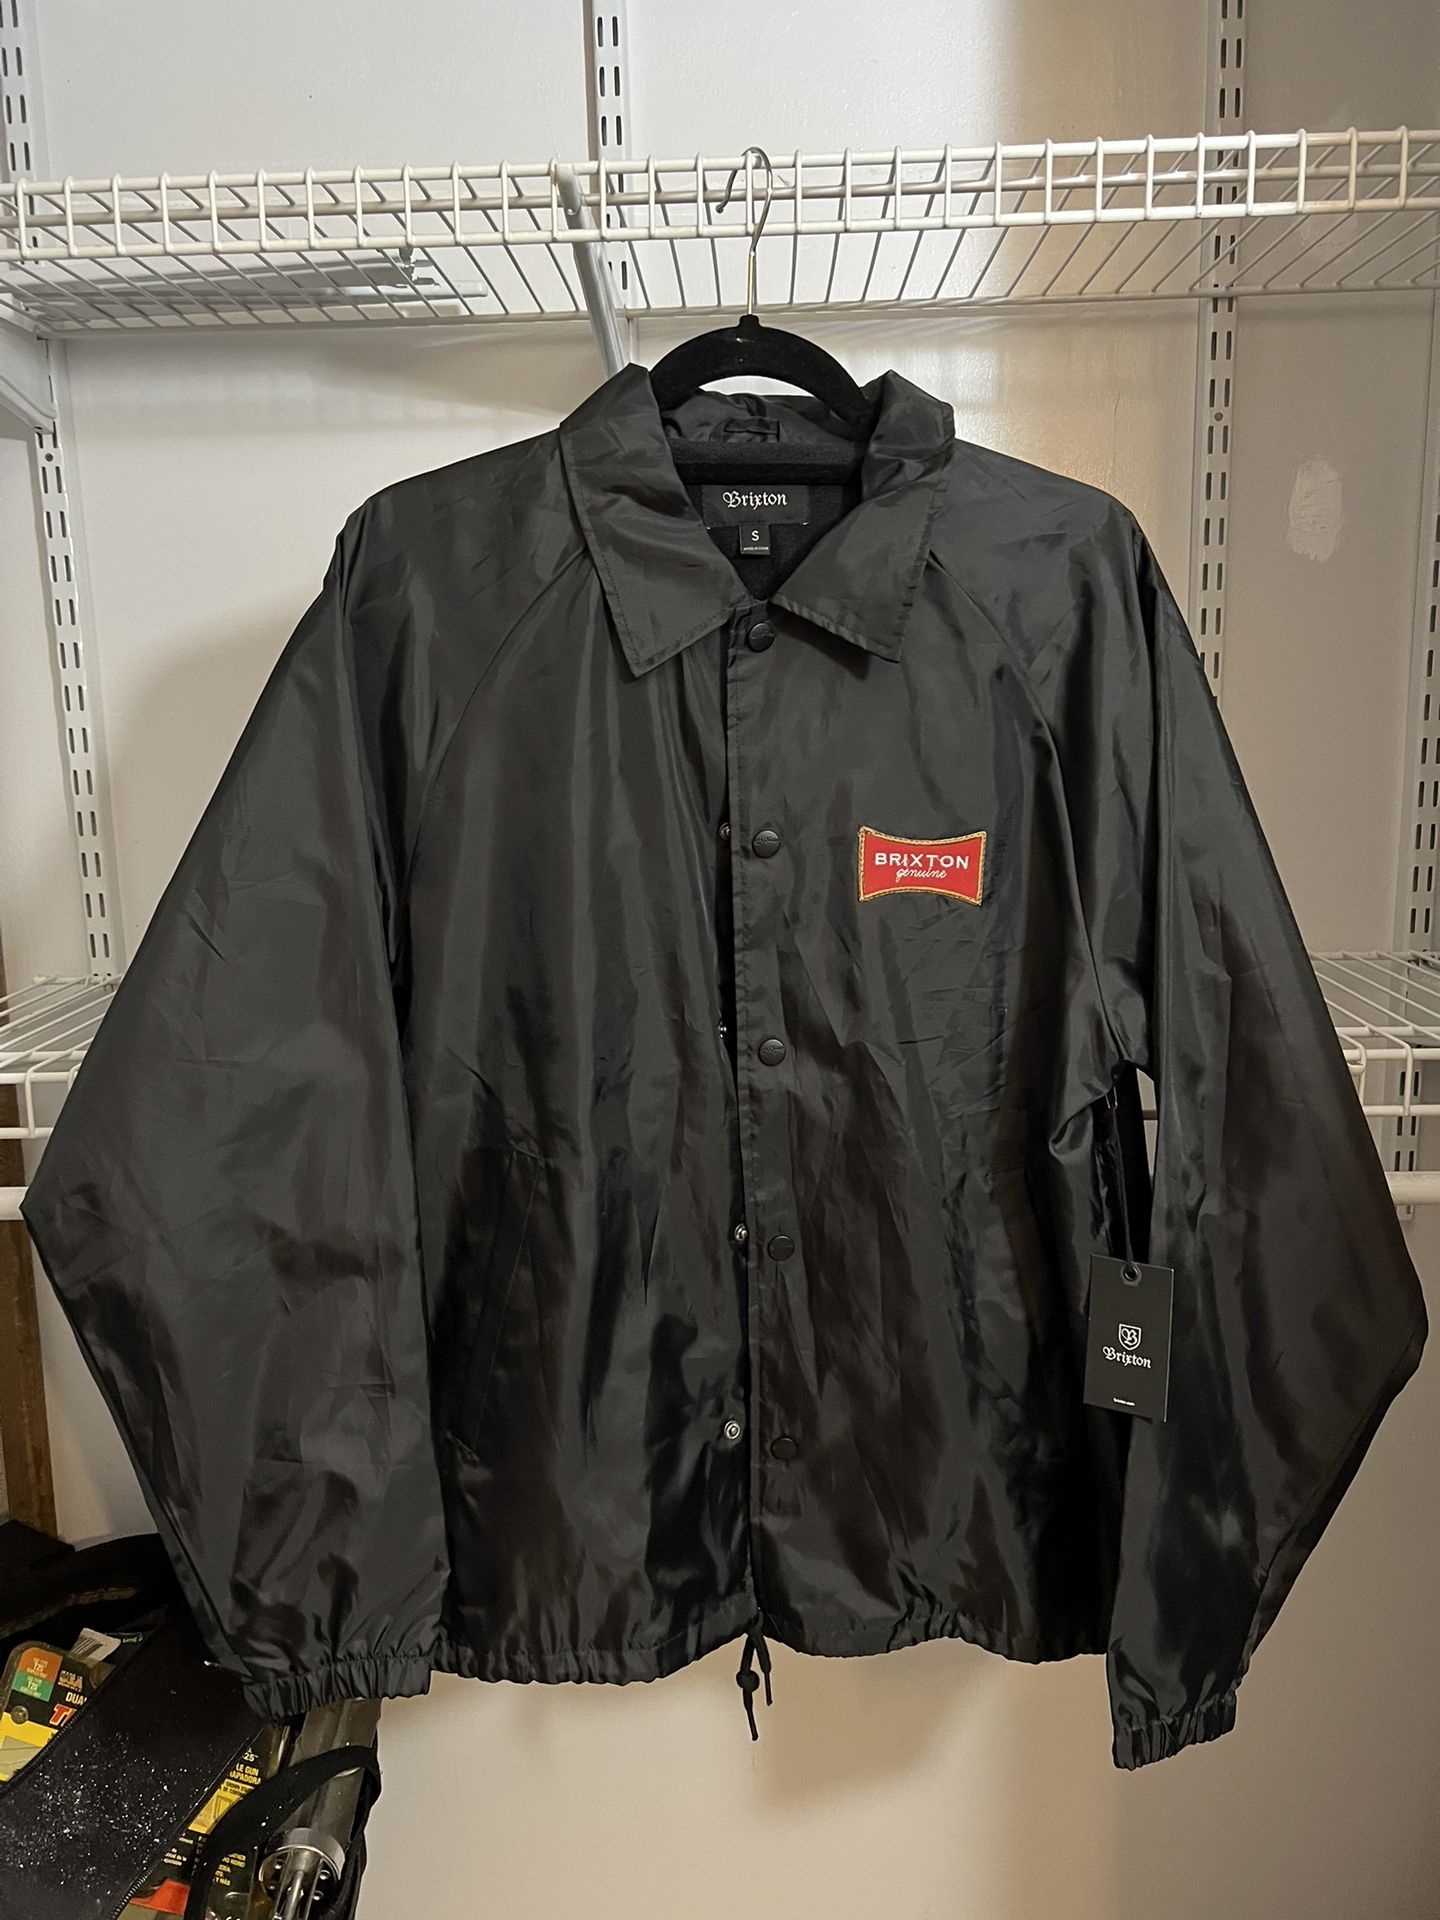 Brand New Brixton Jacket - Size S -  PICKUP IN AIEA - I DON’T DELIVER - PRICE IS FIRM - NO LOW BALLERS 